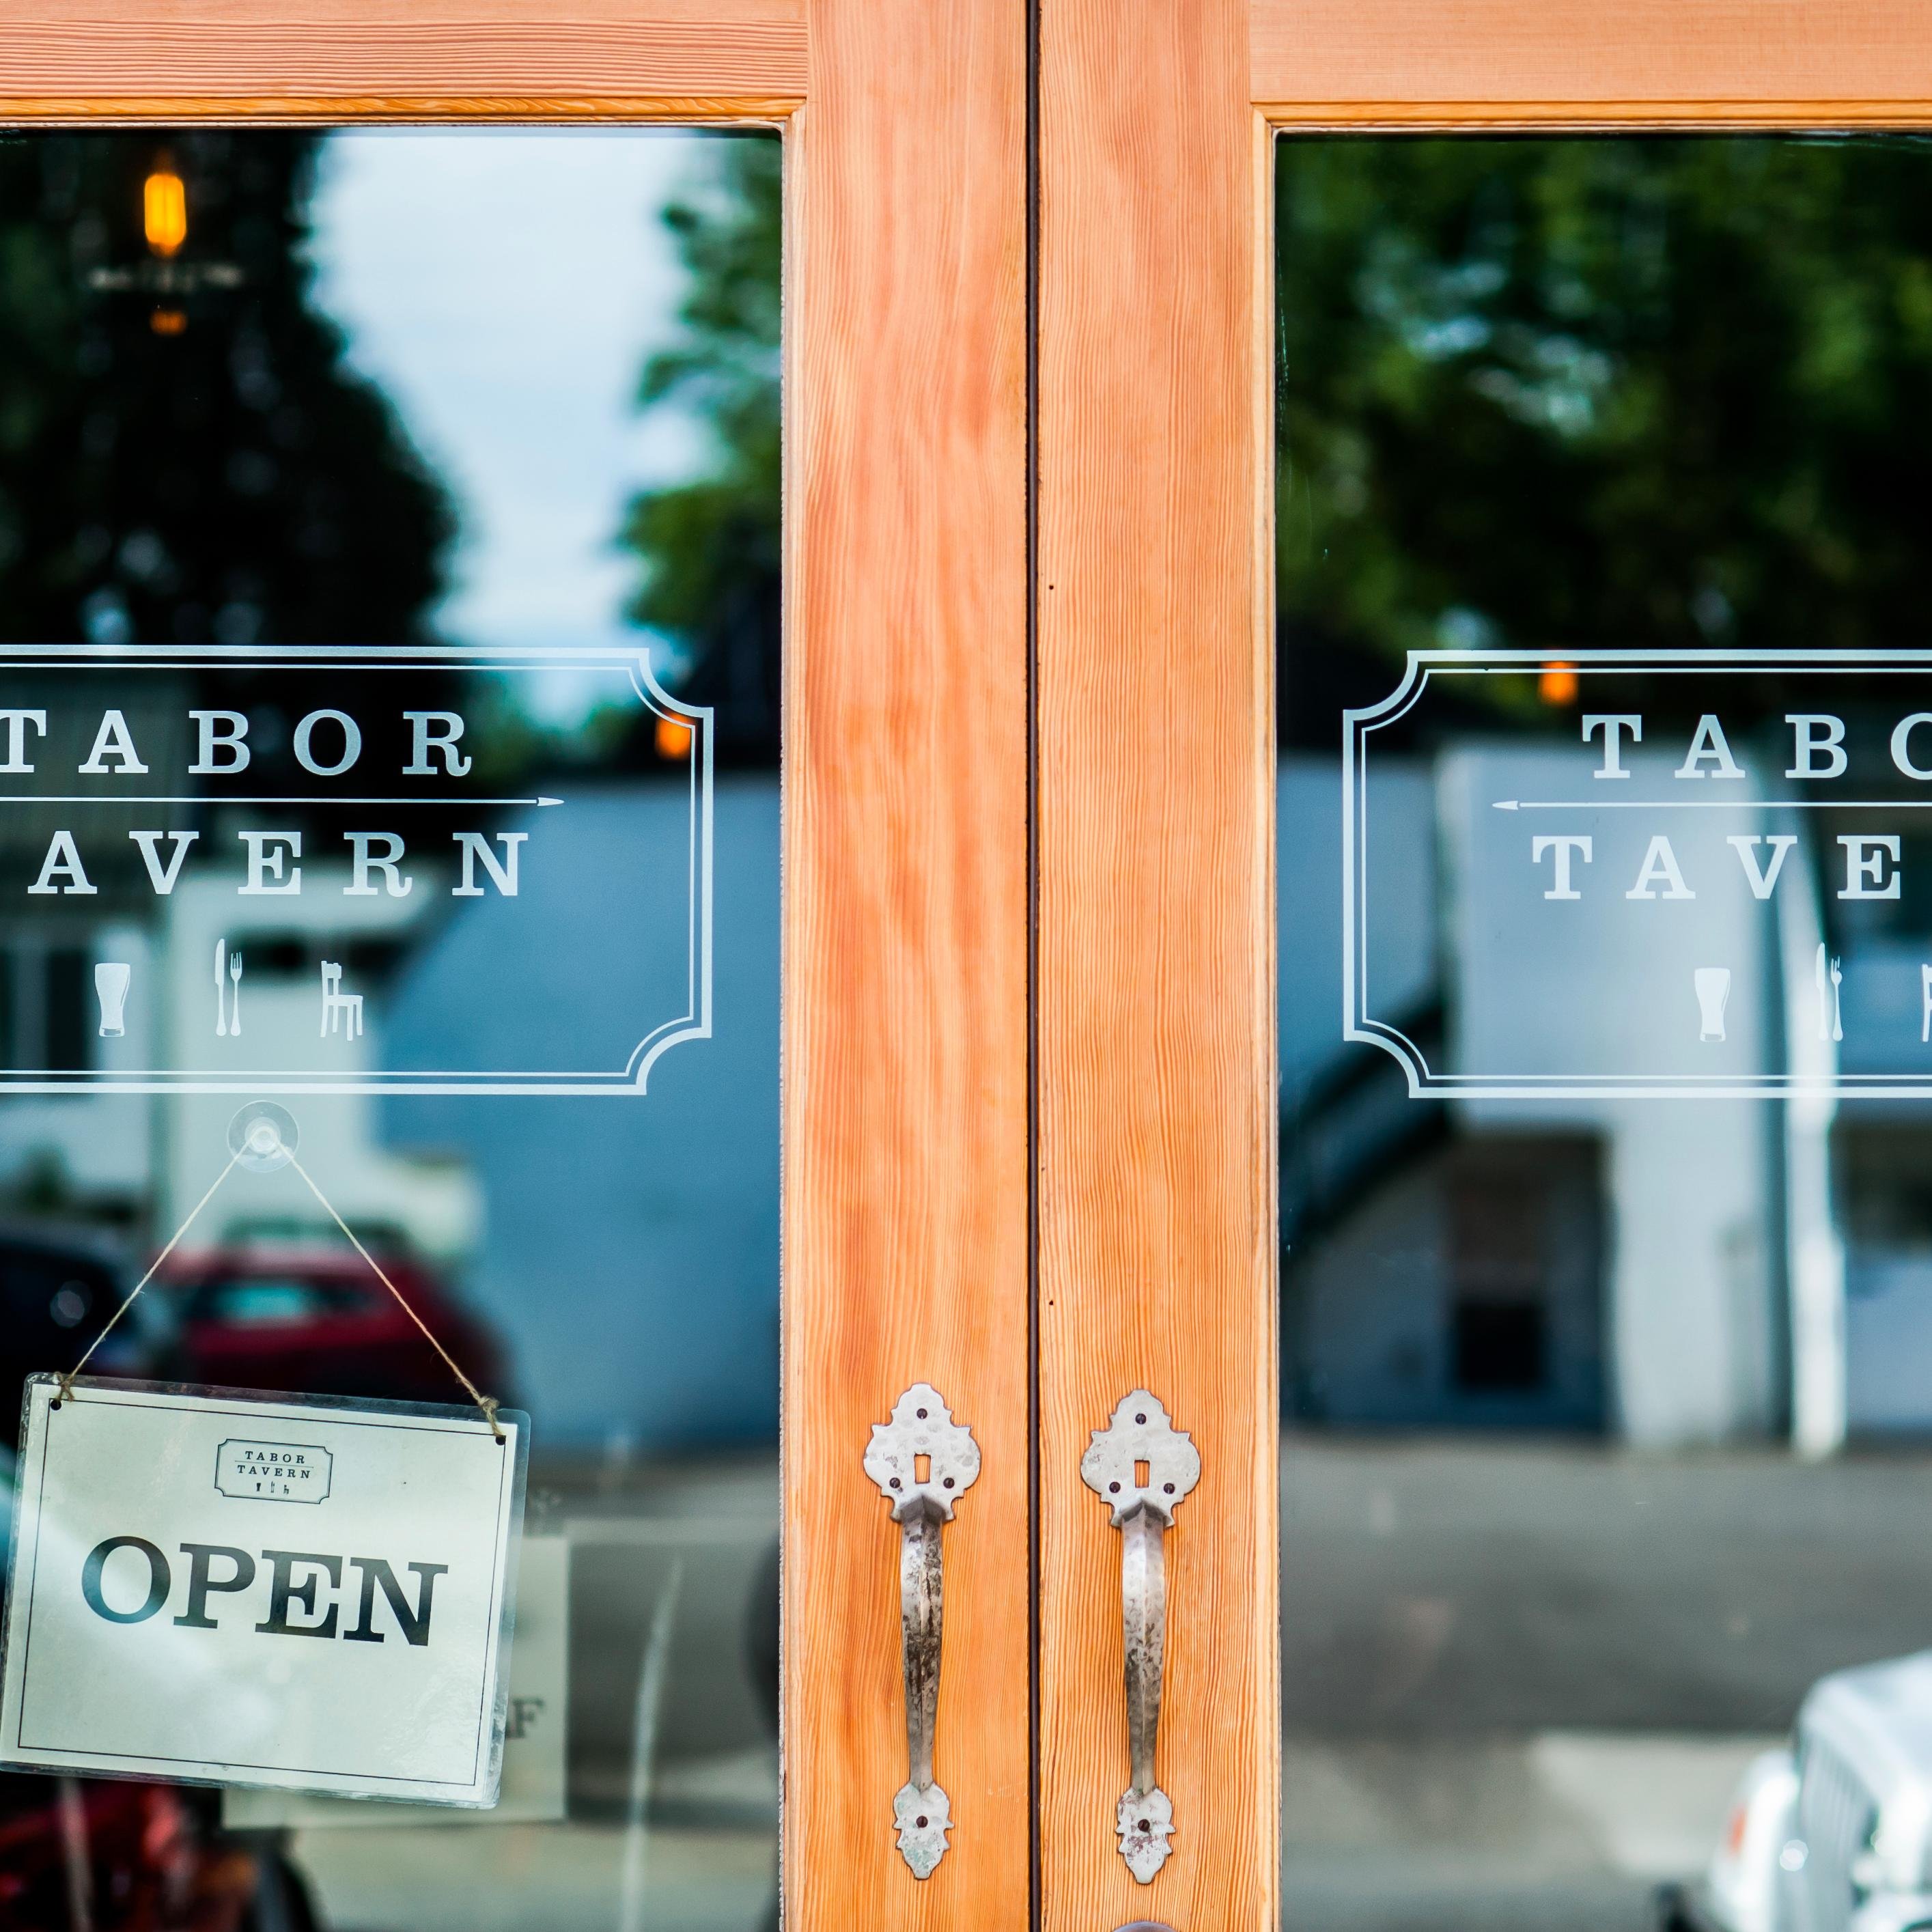 Elevated pub fare and craft libations served 7 days/week in Portland's Mt. Tabor neighborhood.